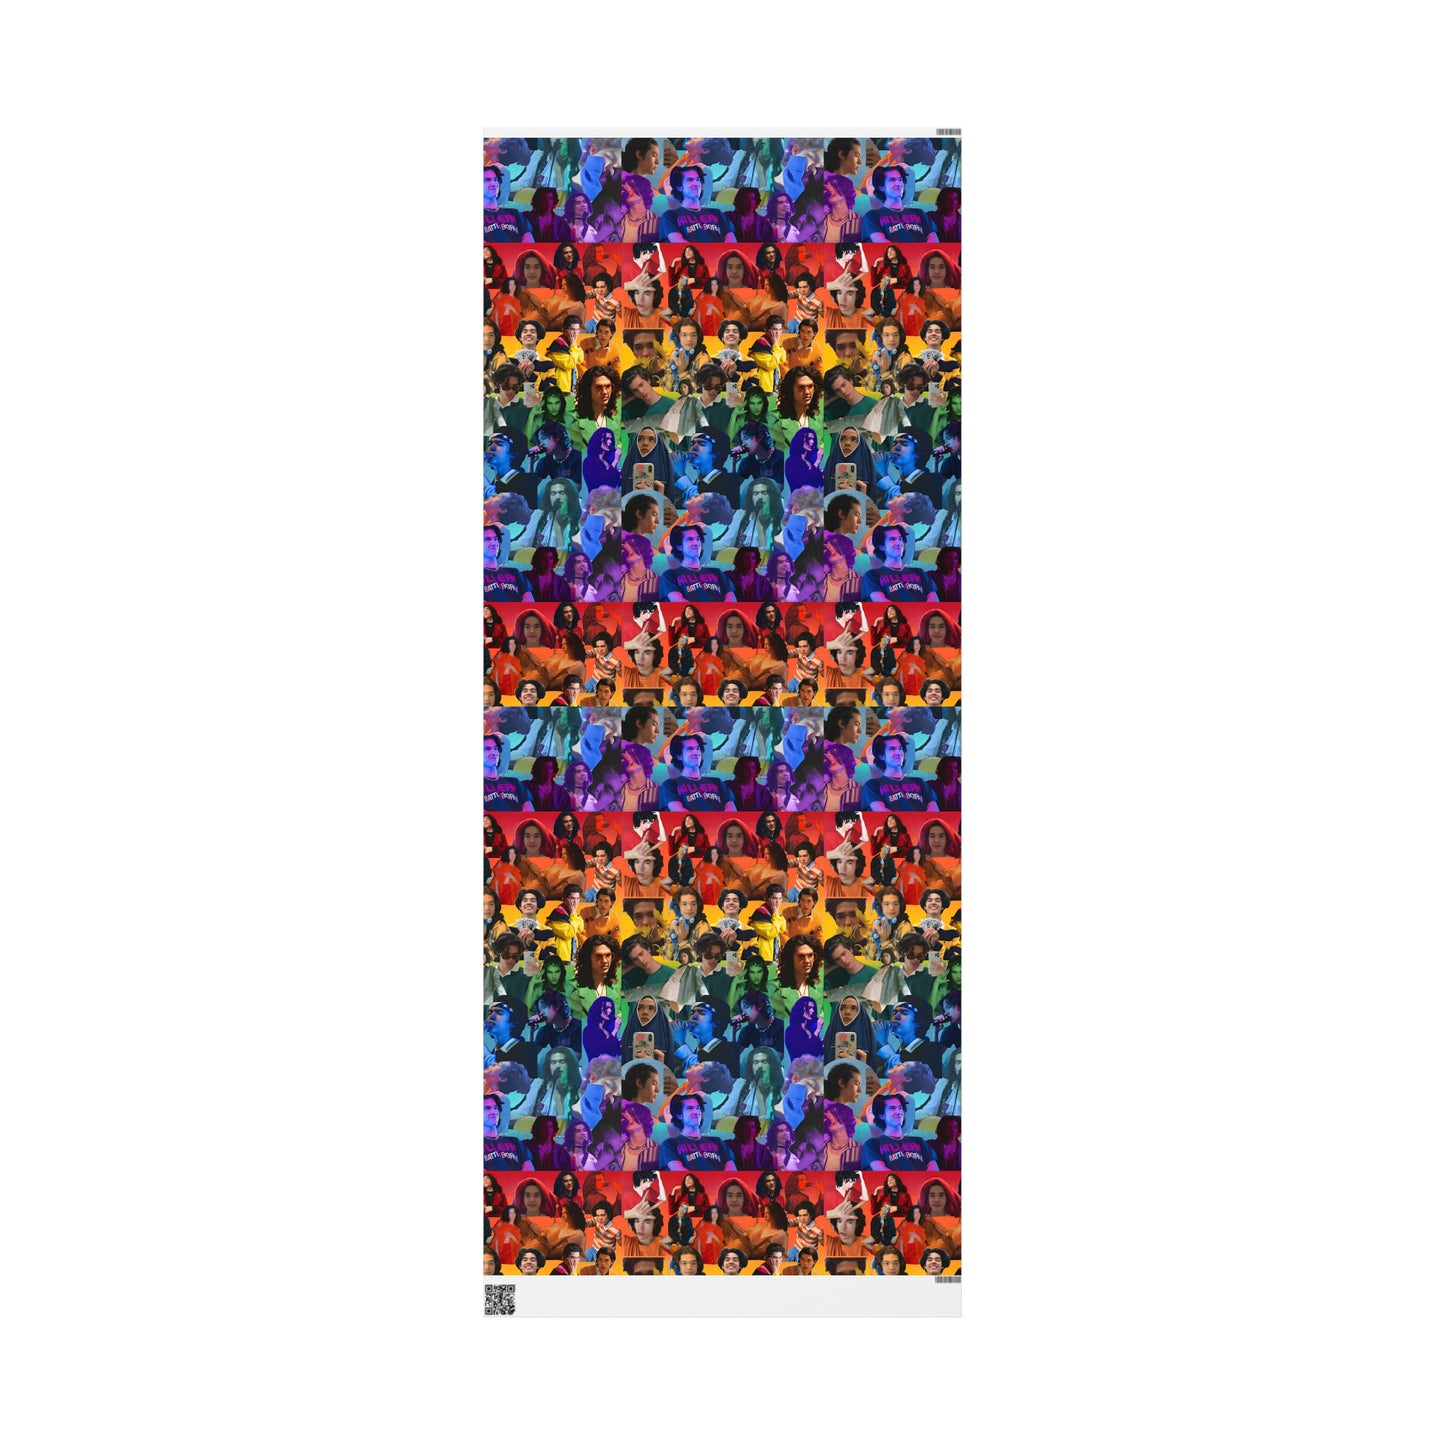 Conan Grey Rainbow Photo Collage Gift Wrapping Paper